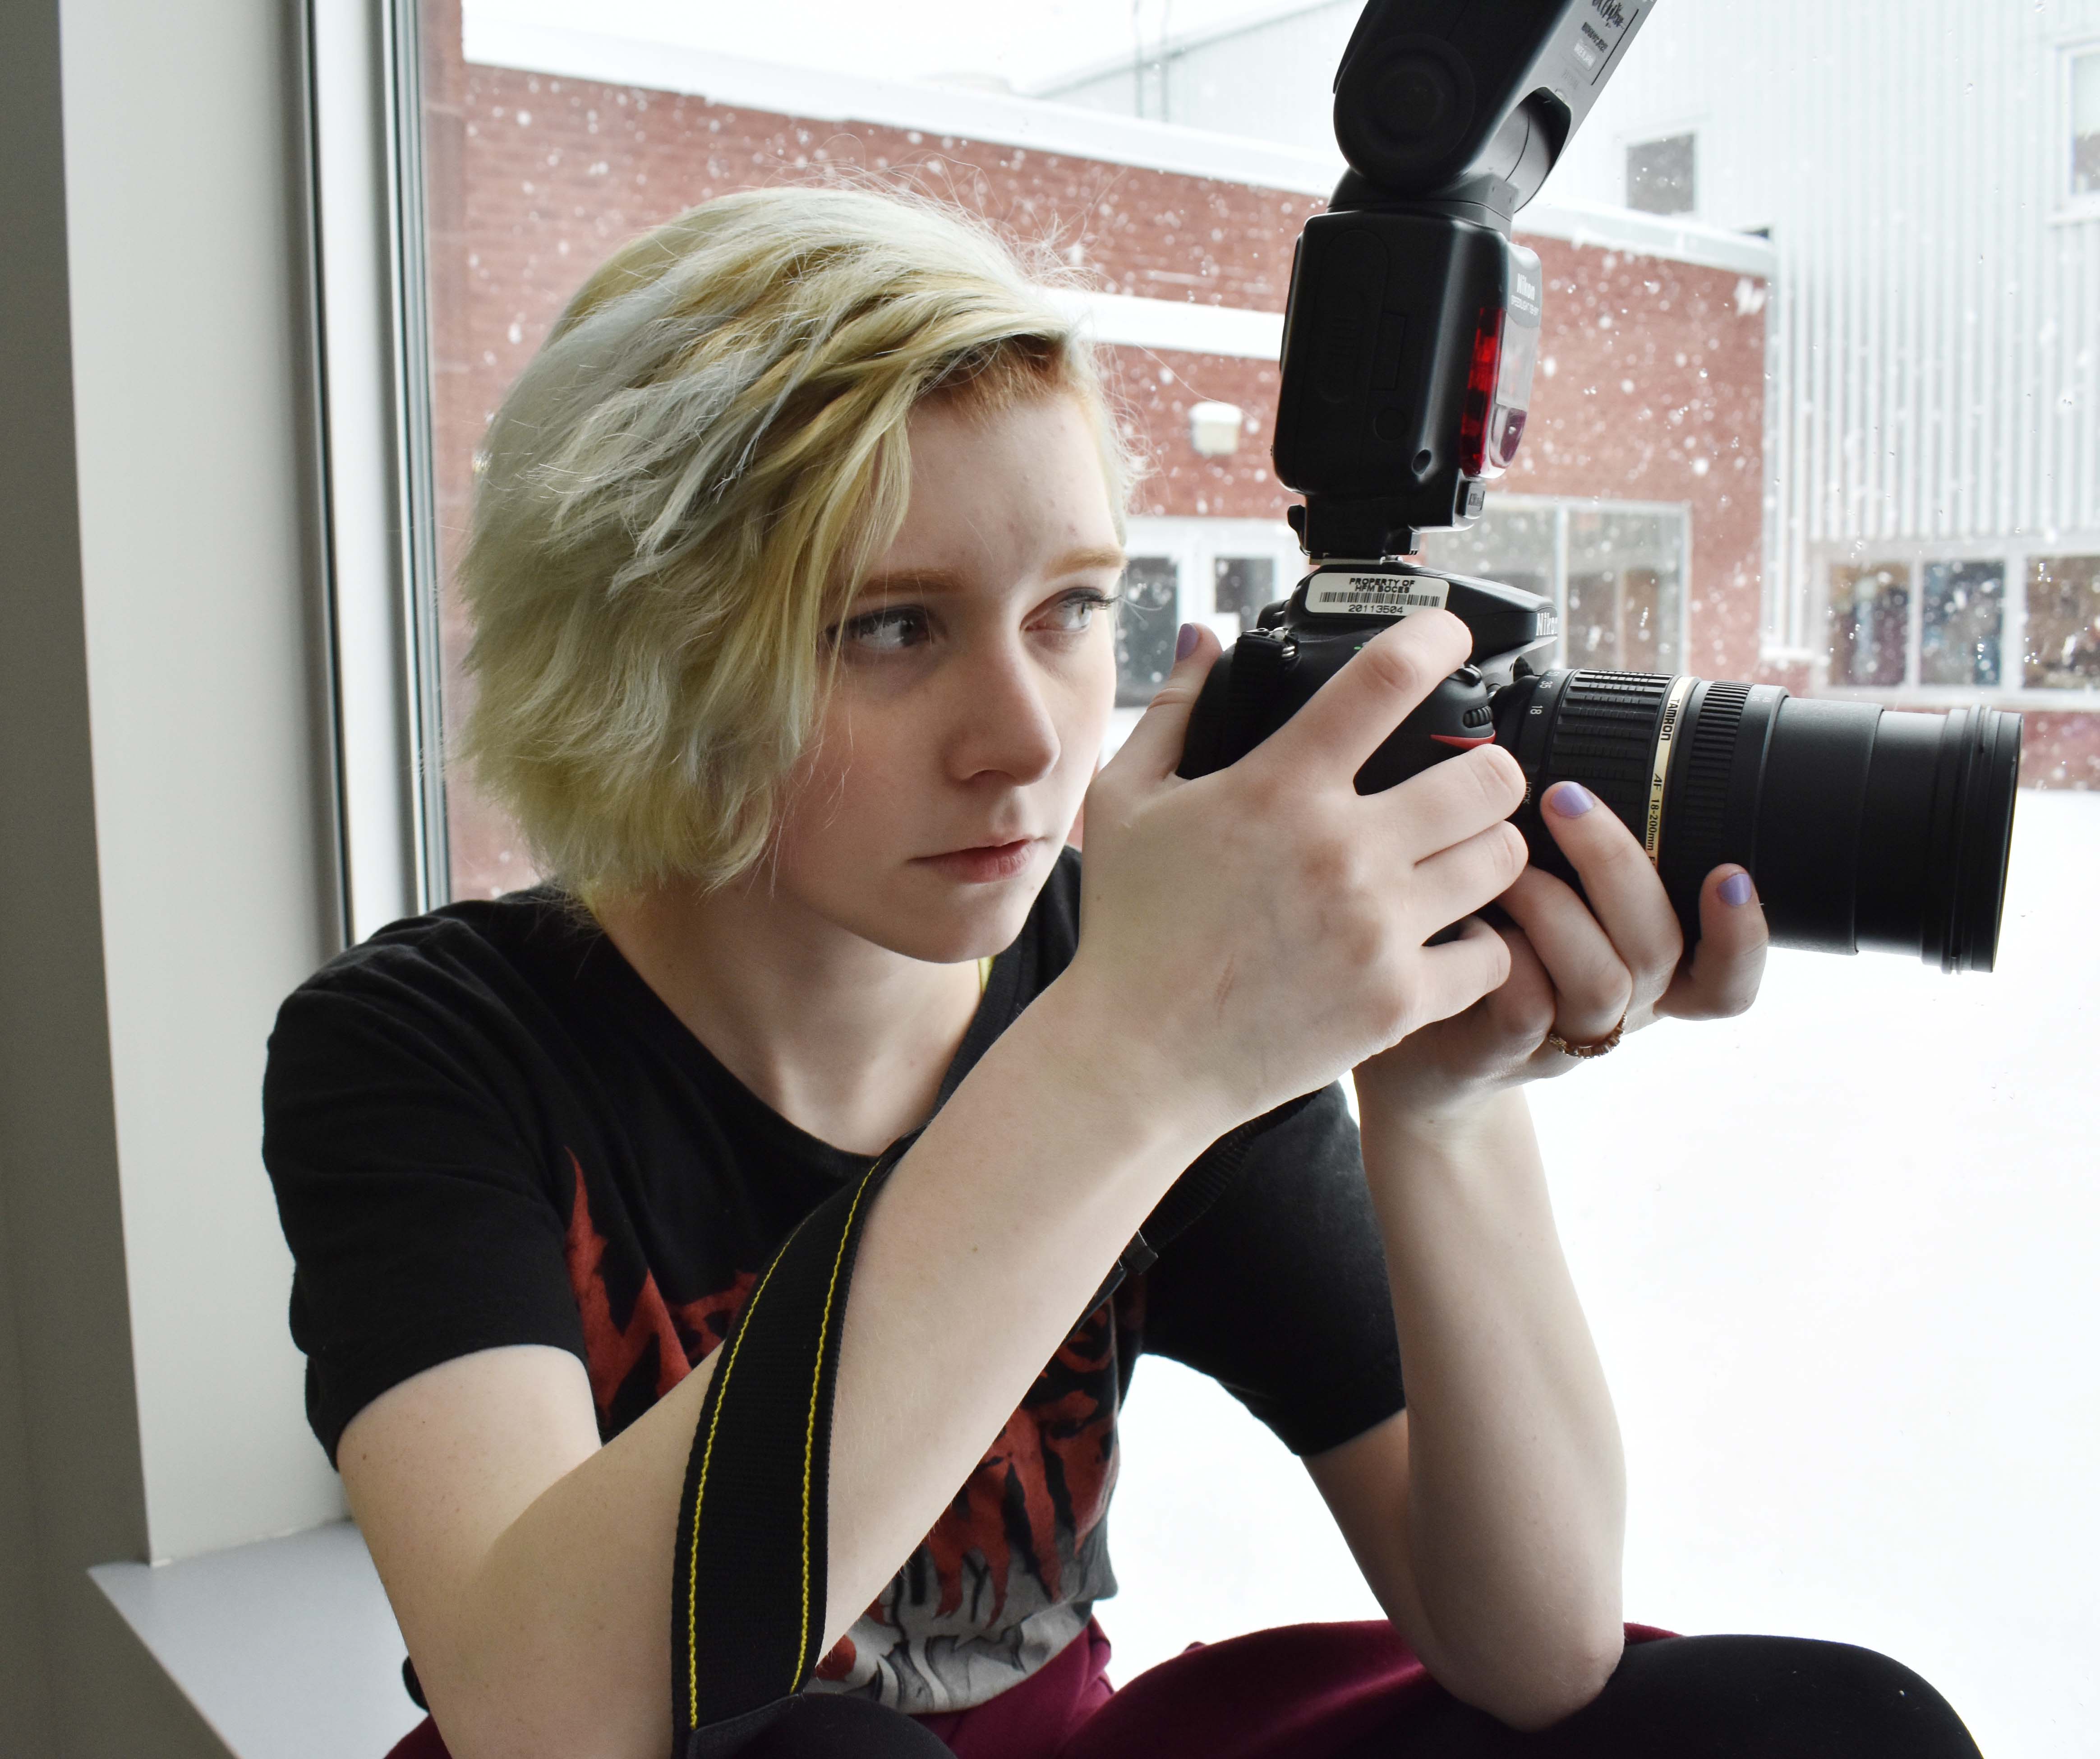 A student with a camera sits near a window preparing to take a picture.